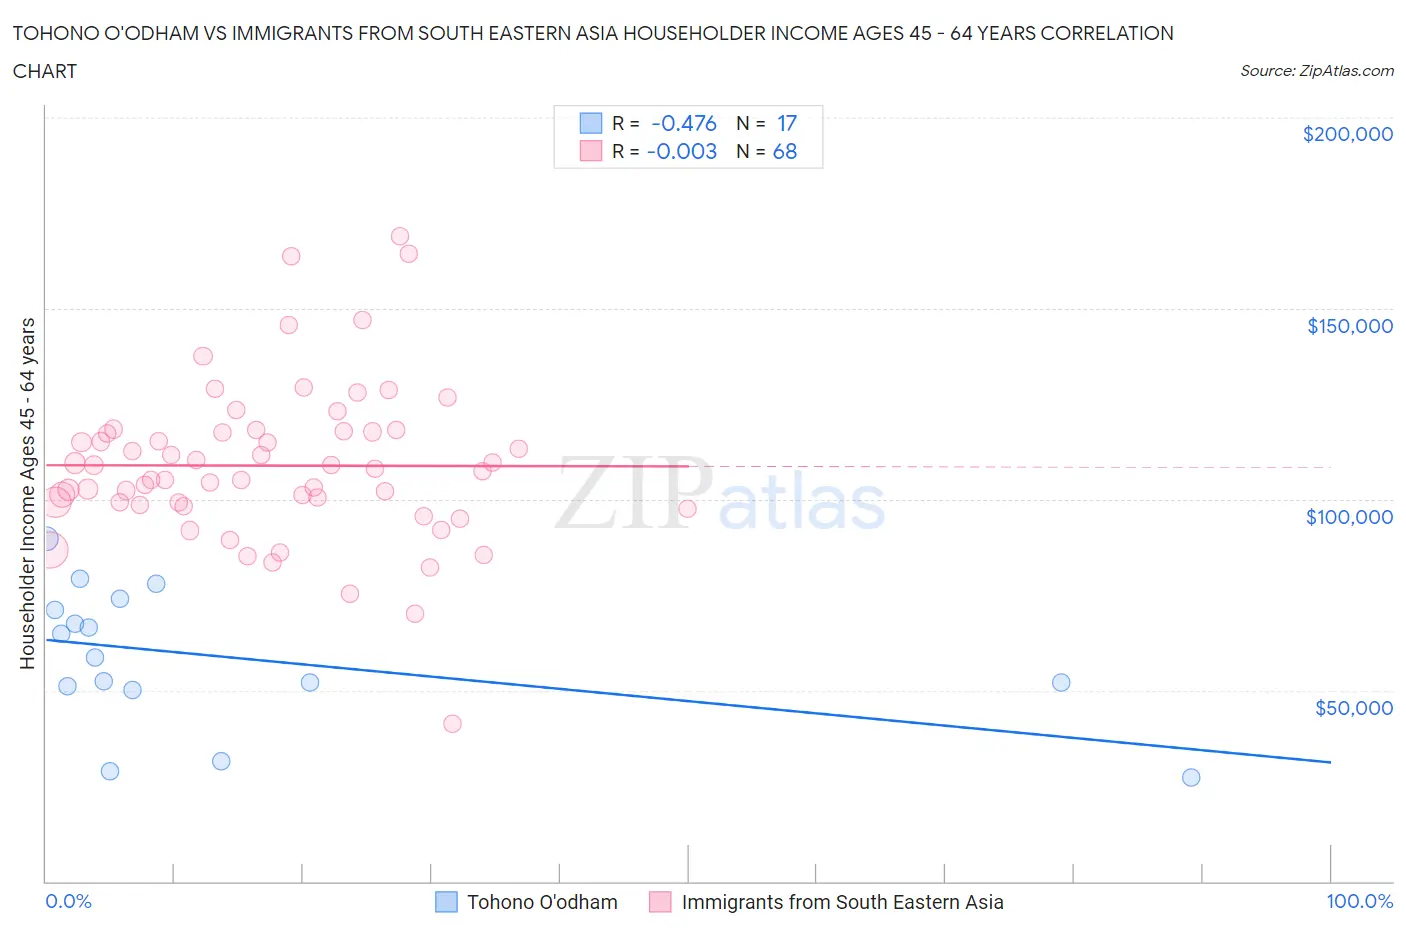 Tohono O'odham vs Immigrants from South Eastern Asia Householder Income Ages 45 - 64 years